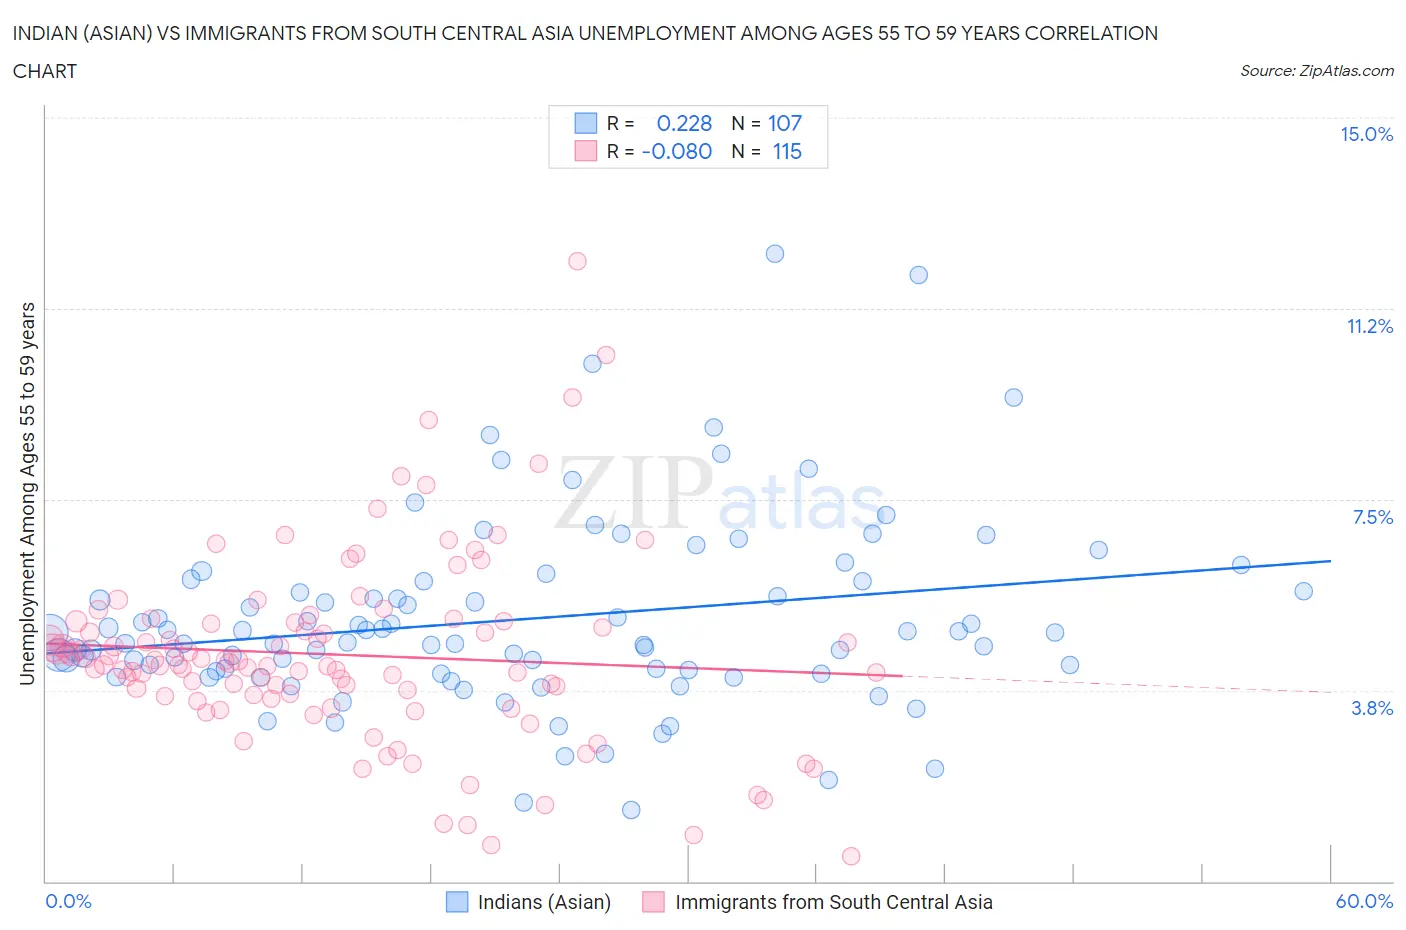 Indian (Asian) vs Immigrants from South Central Asia Unemployment Among Ages 55 to 59 years